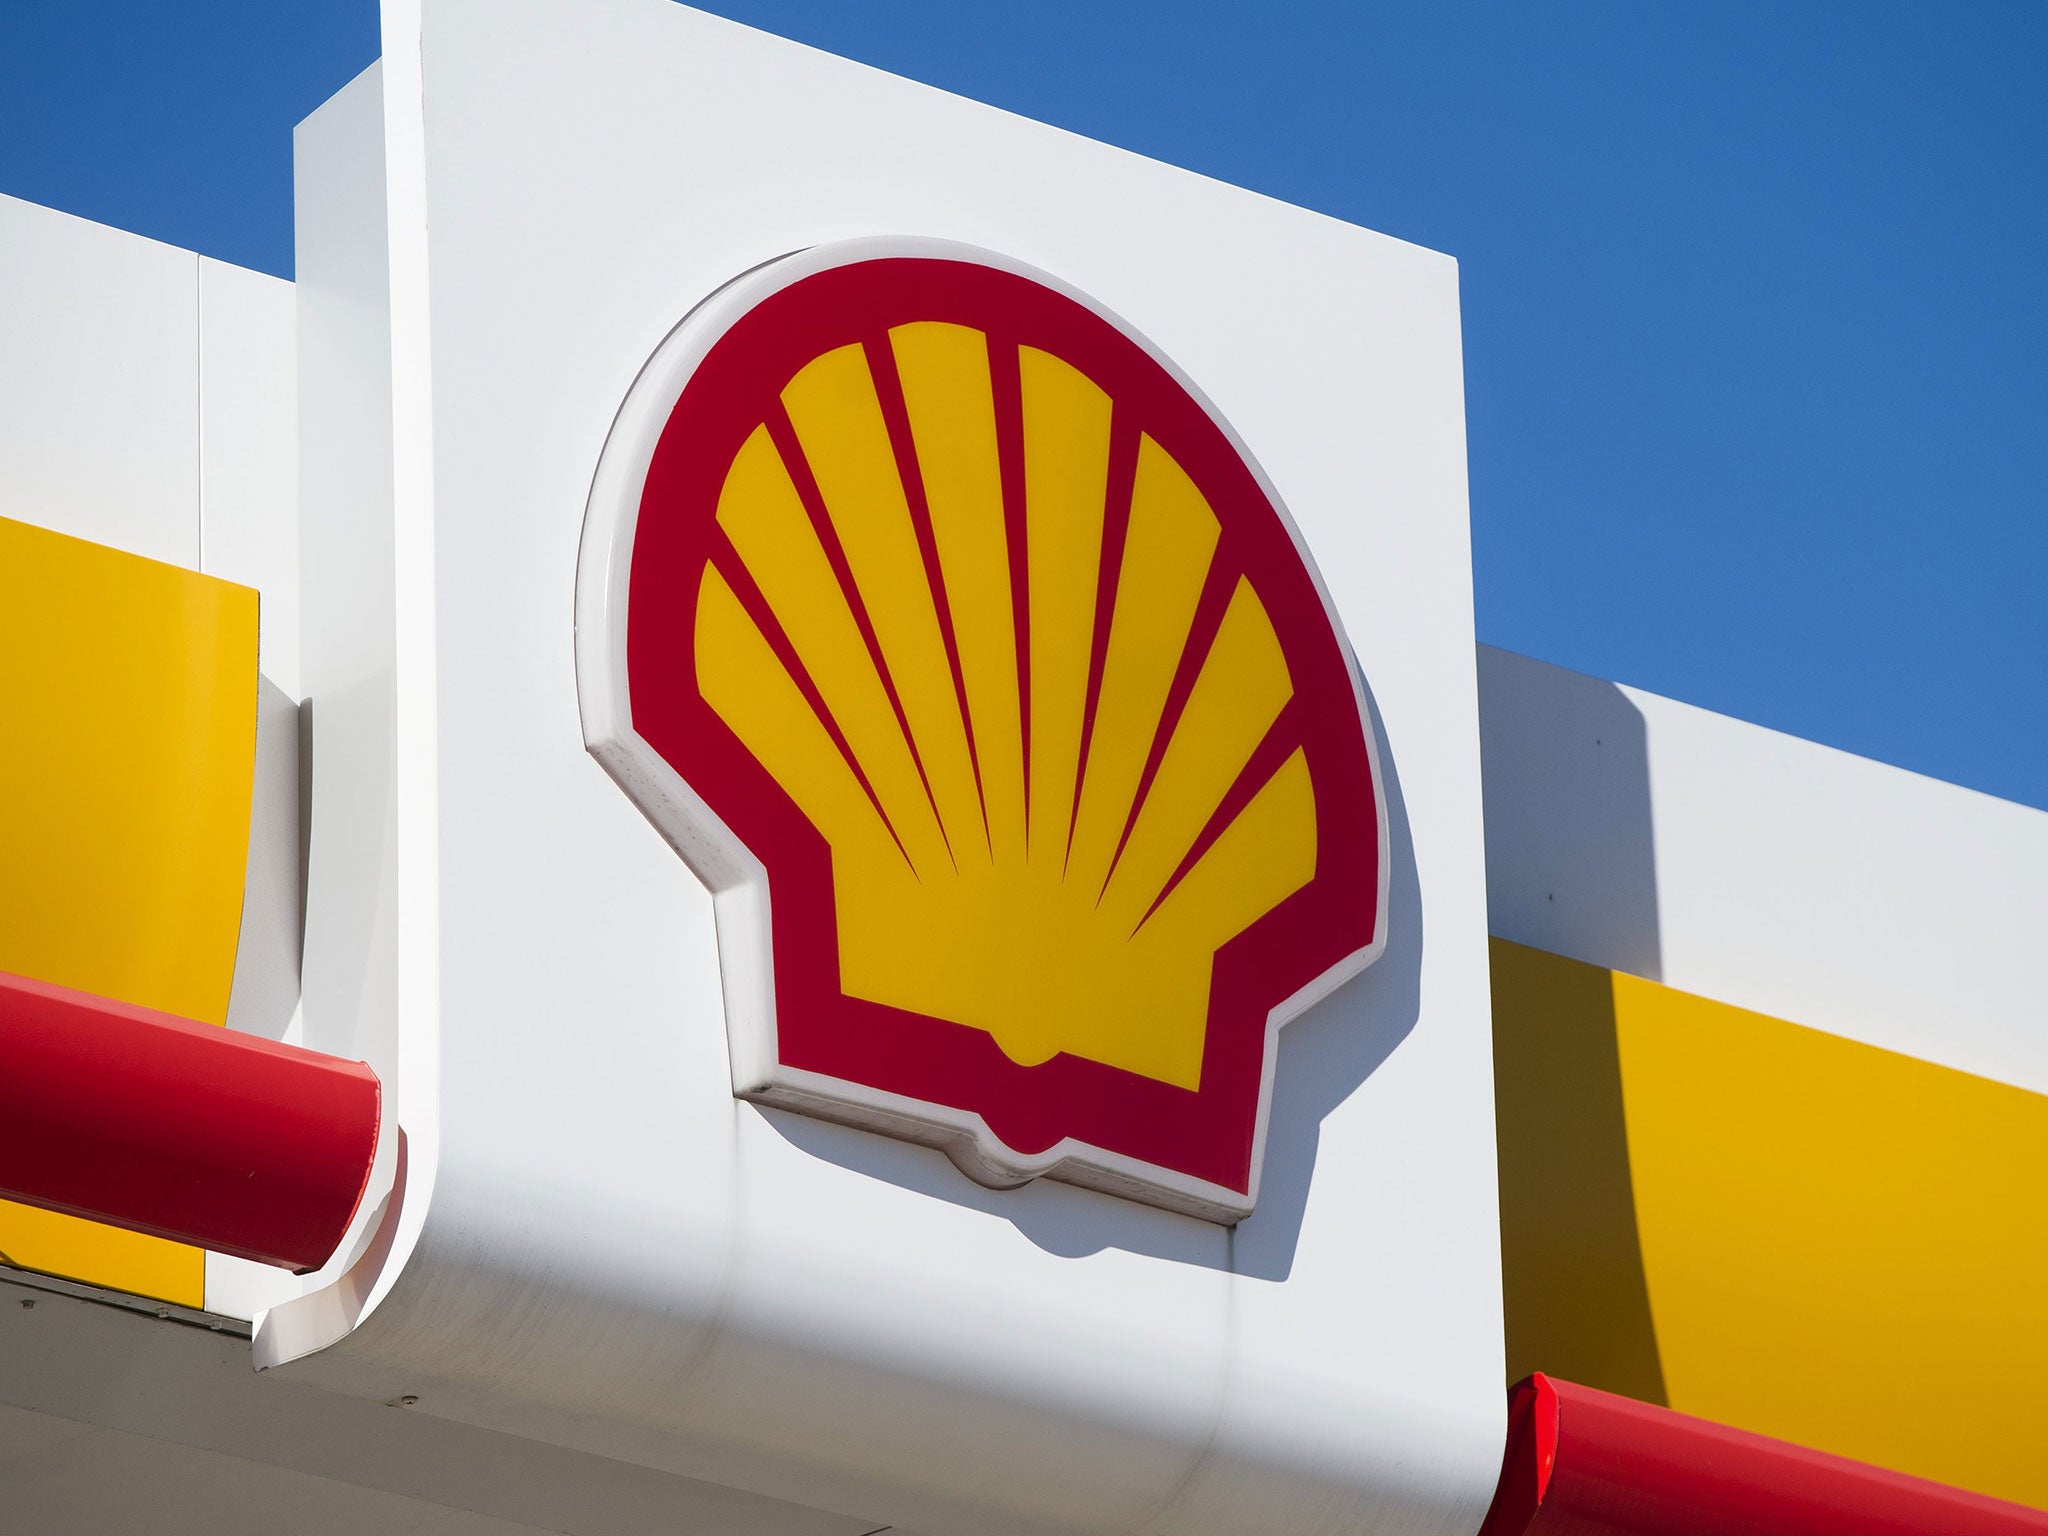 Shell has struggled to stem losses from oil and gas production as the oil price has slumped